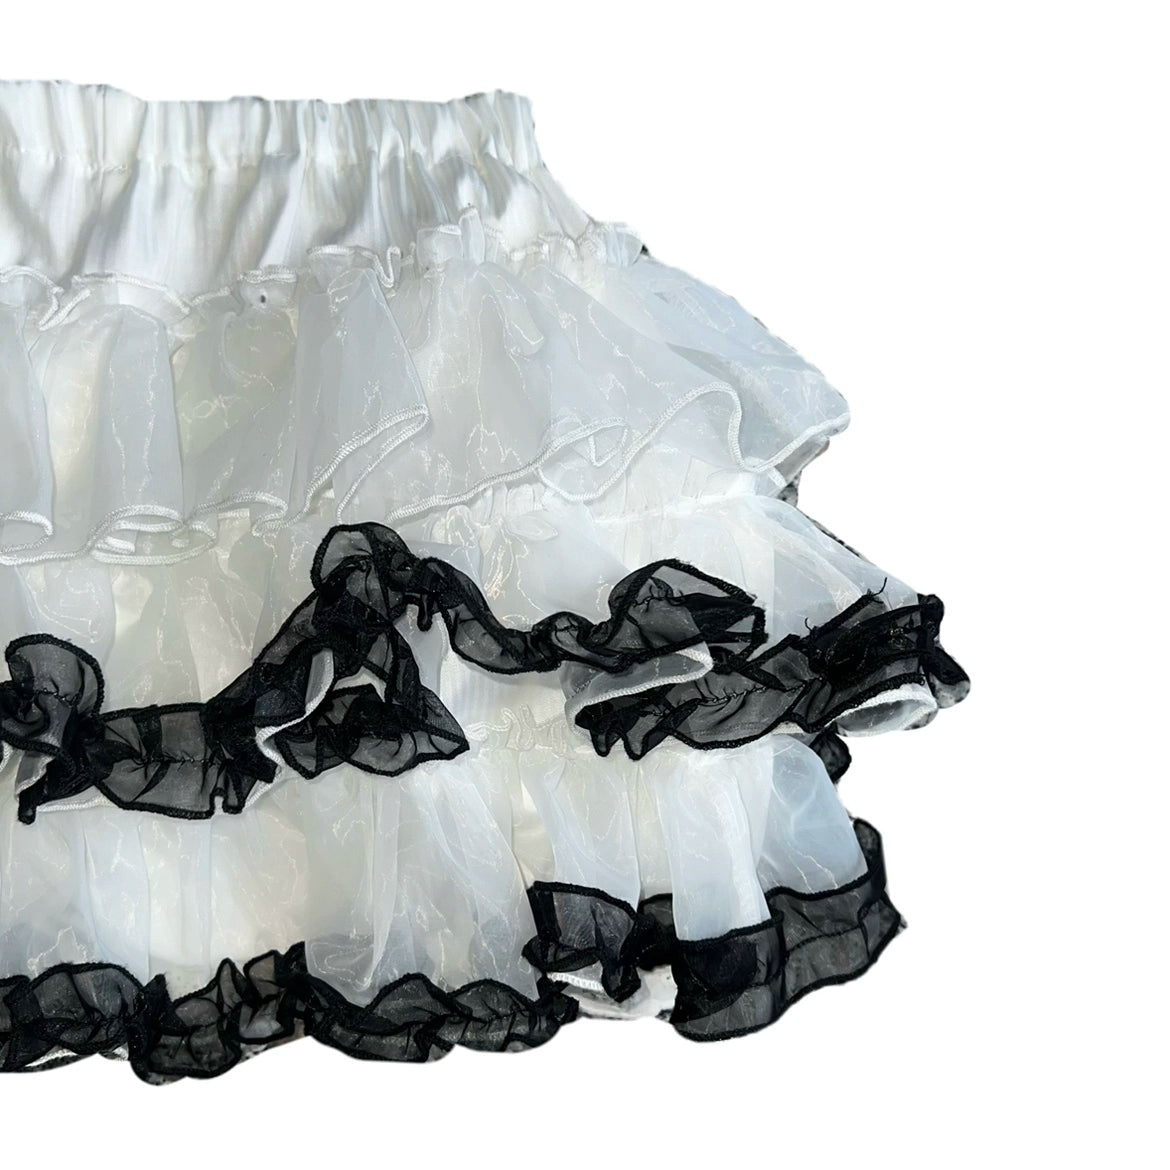 Subculture Skirt Black White Bloomers 36592:561206